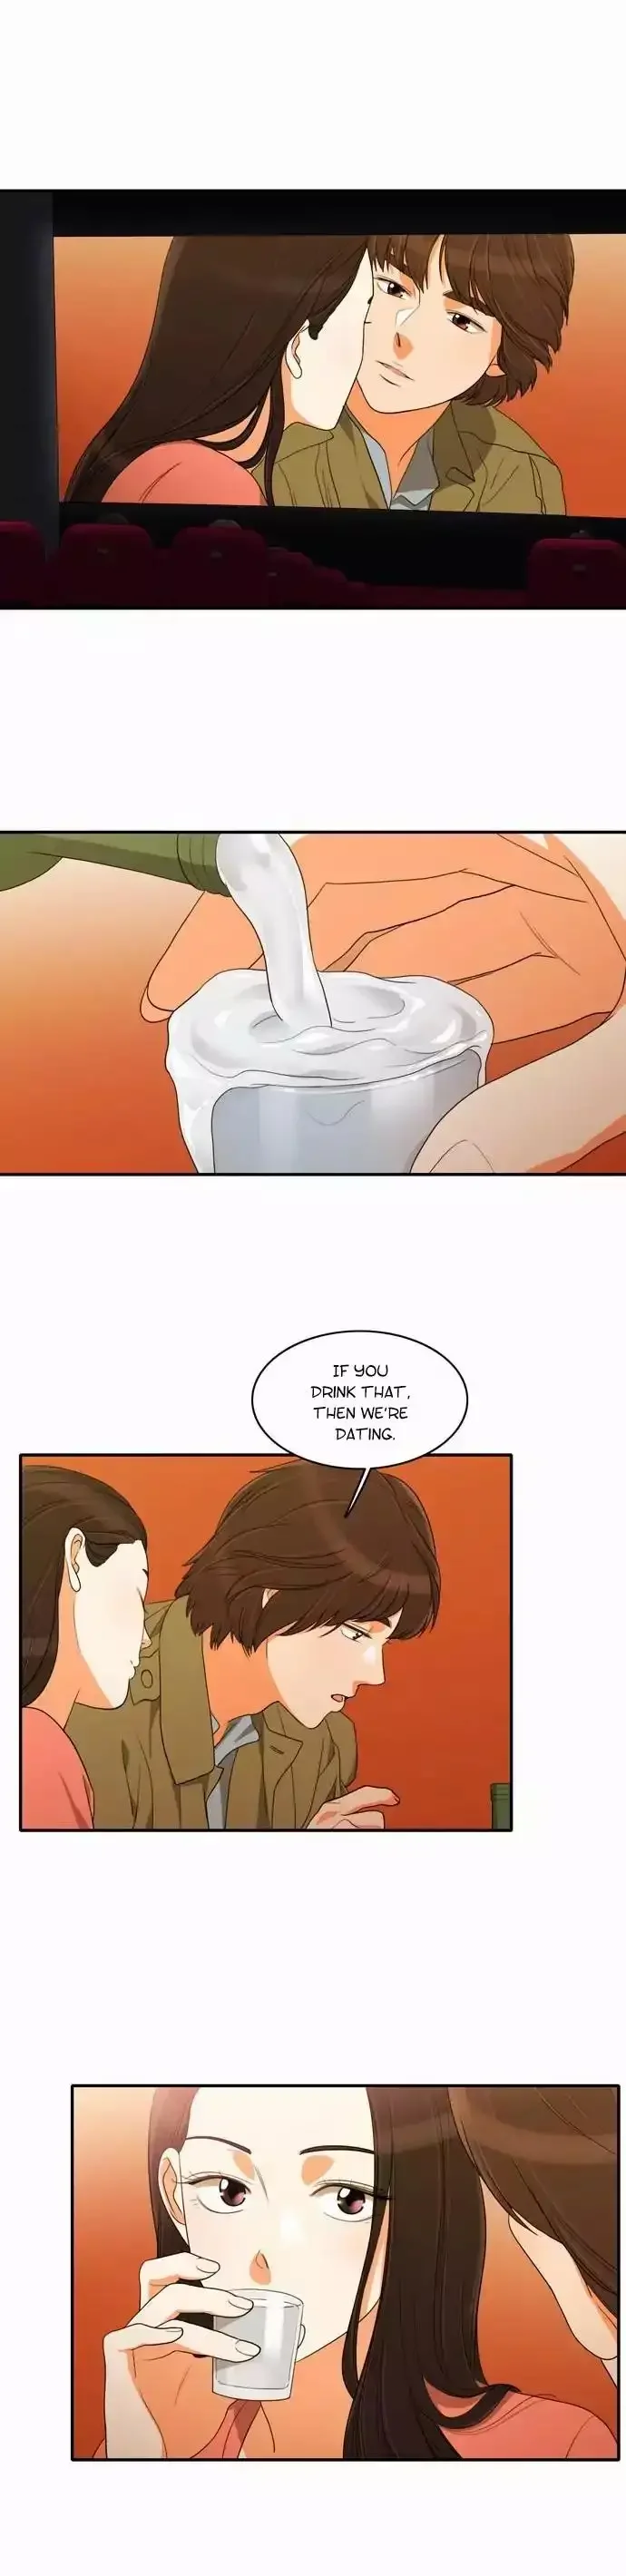 do-it-one-more-time-chap-31-16